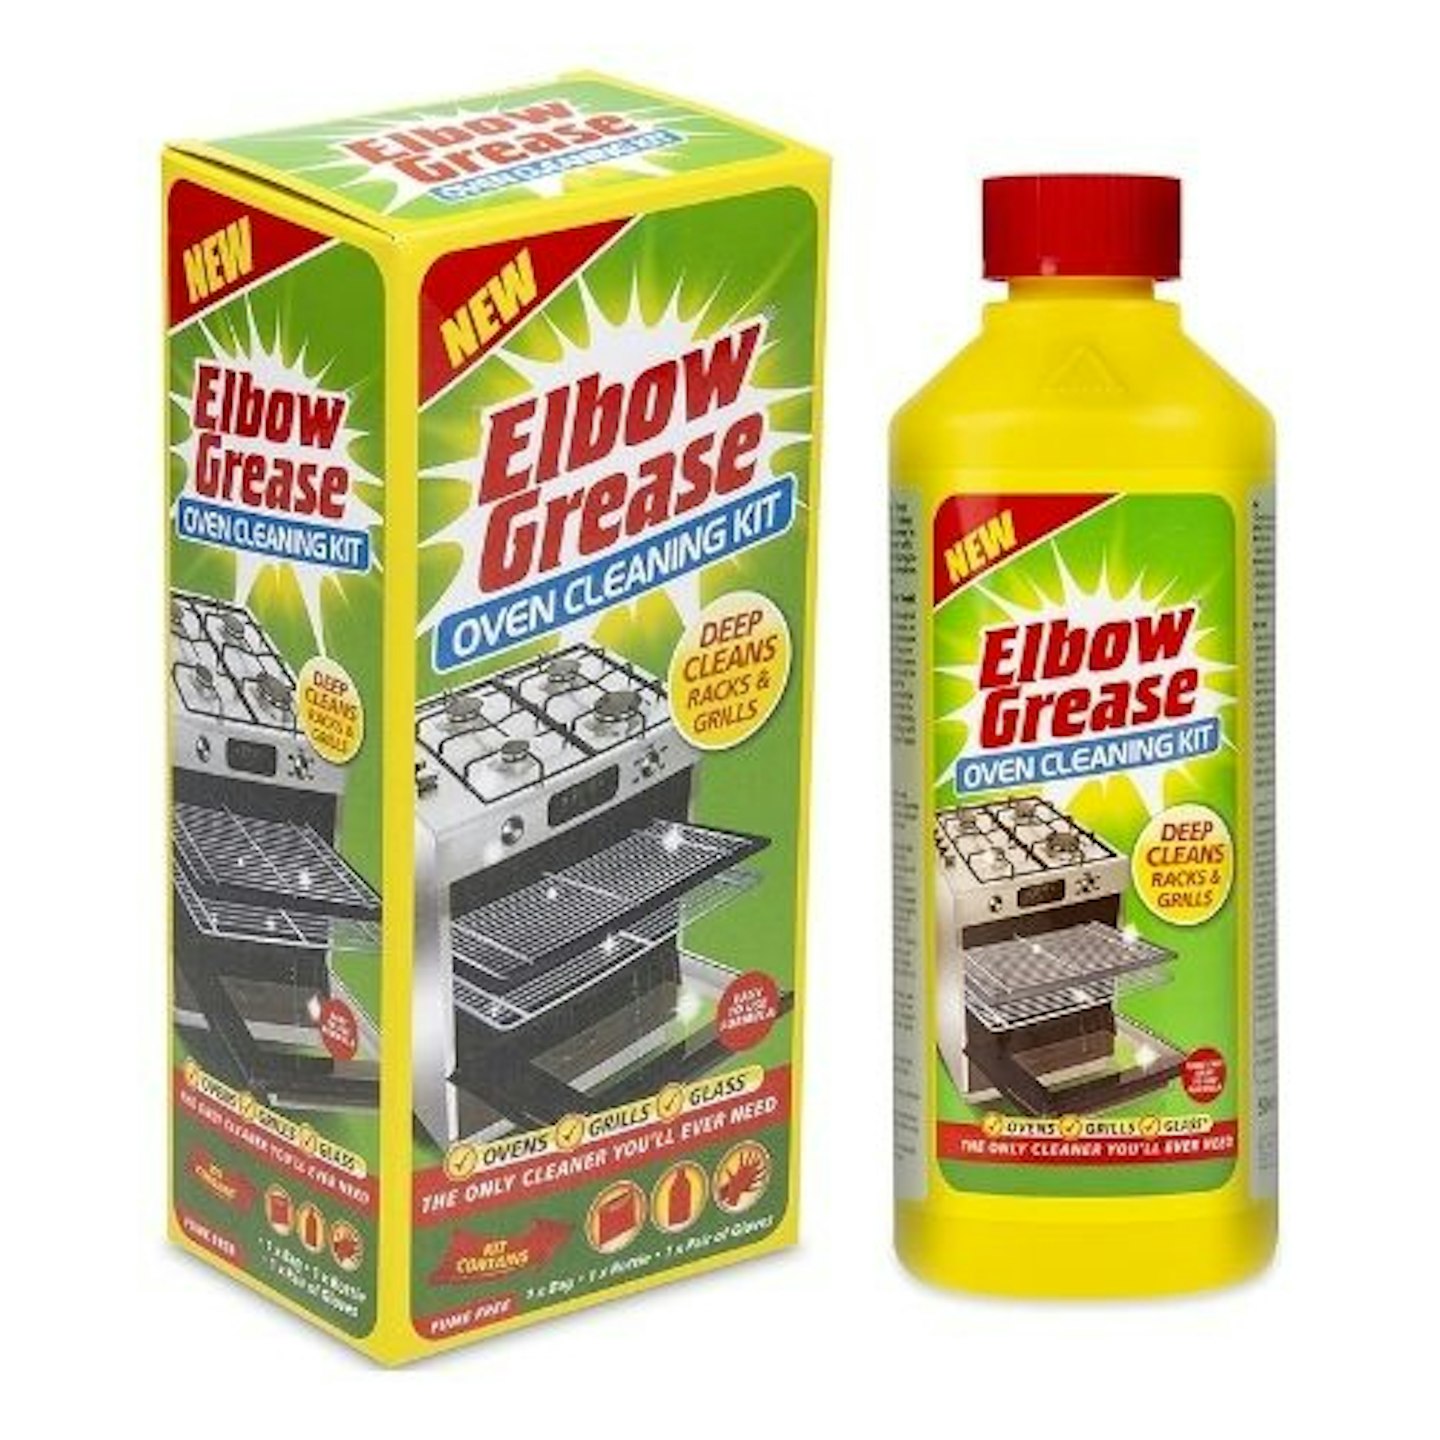 Elbow Grease, Oven Cleaning Kit 